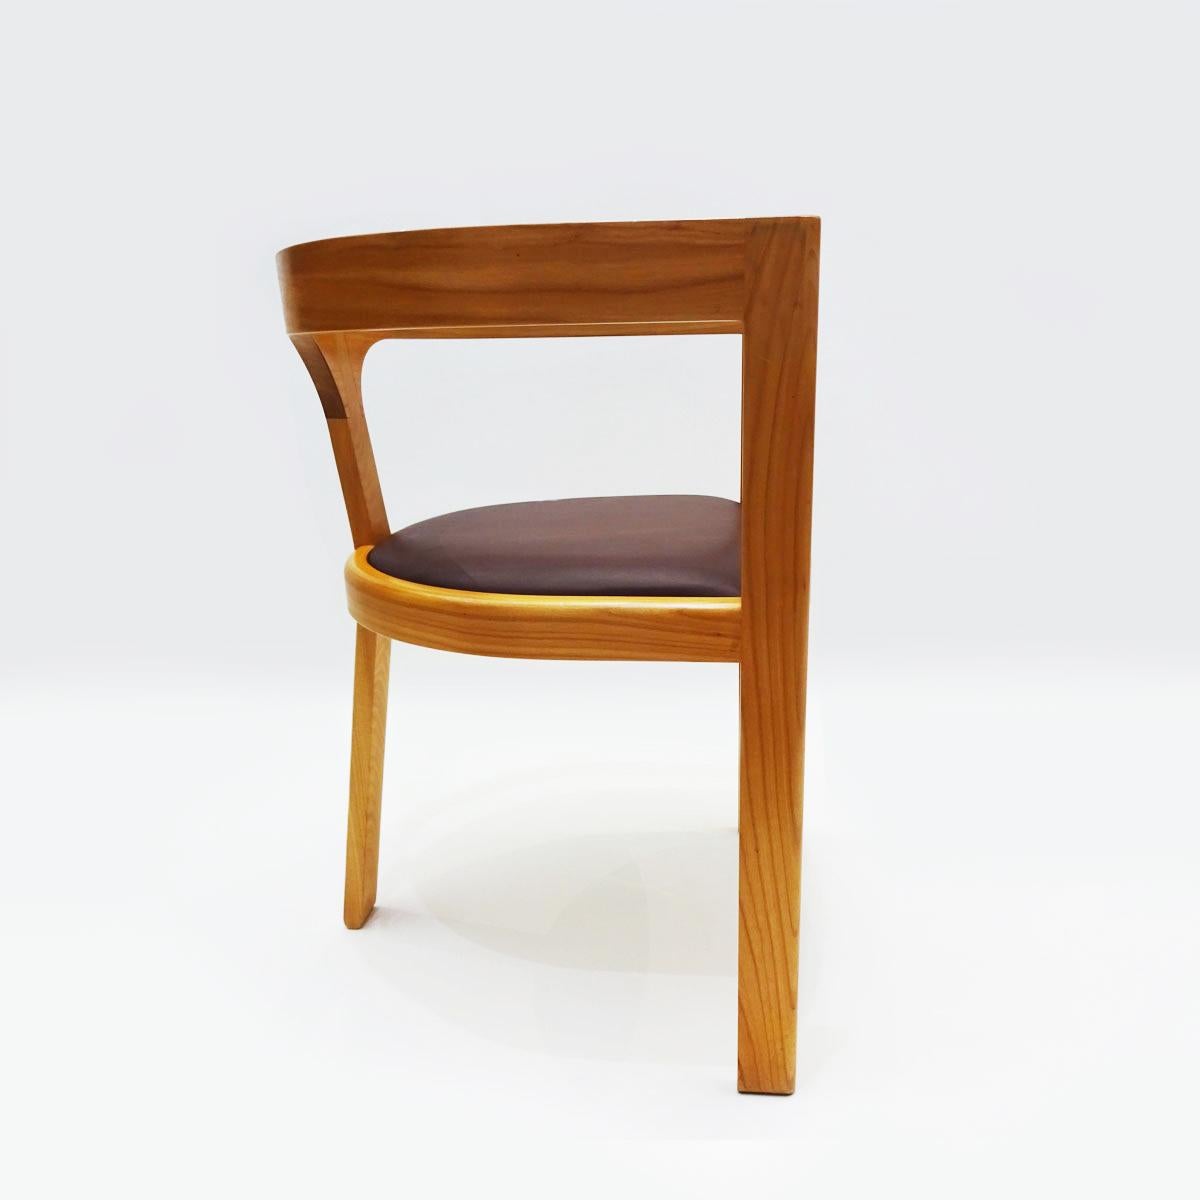 A unique first Edition 1999 desk or side chair in cherrywood and leather by Danish Master Craftsmen Rud Thygesen and Niels Roth Andersen

Famous for producing furniture for Danish King Frederik IX in 1970 Rud Thygesen and Johnny Sørensen went on